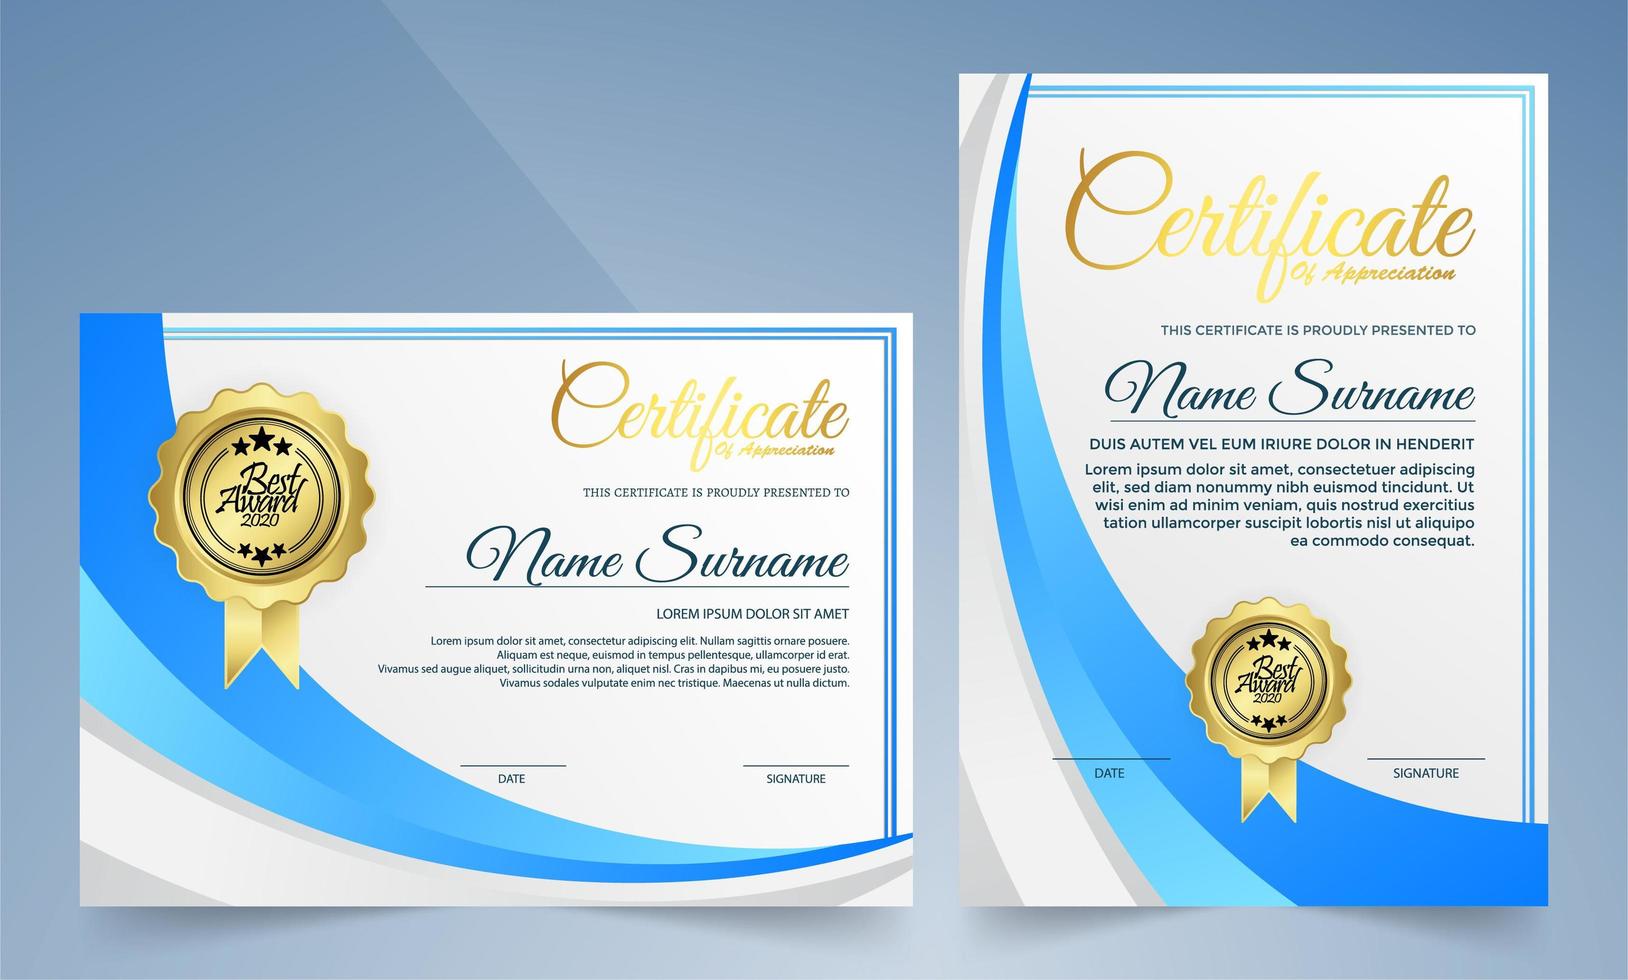 Horizontal and vertical blue and white curved shape certificates vector